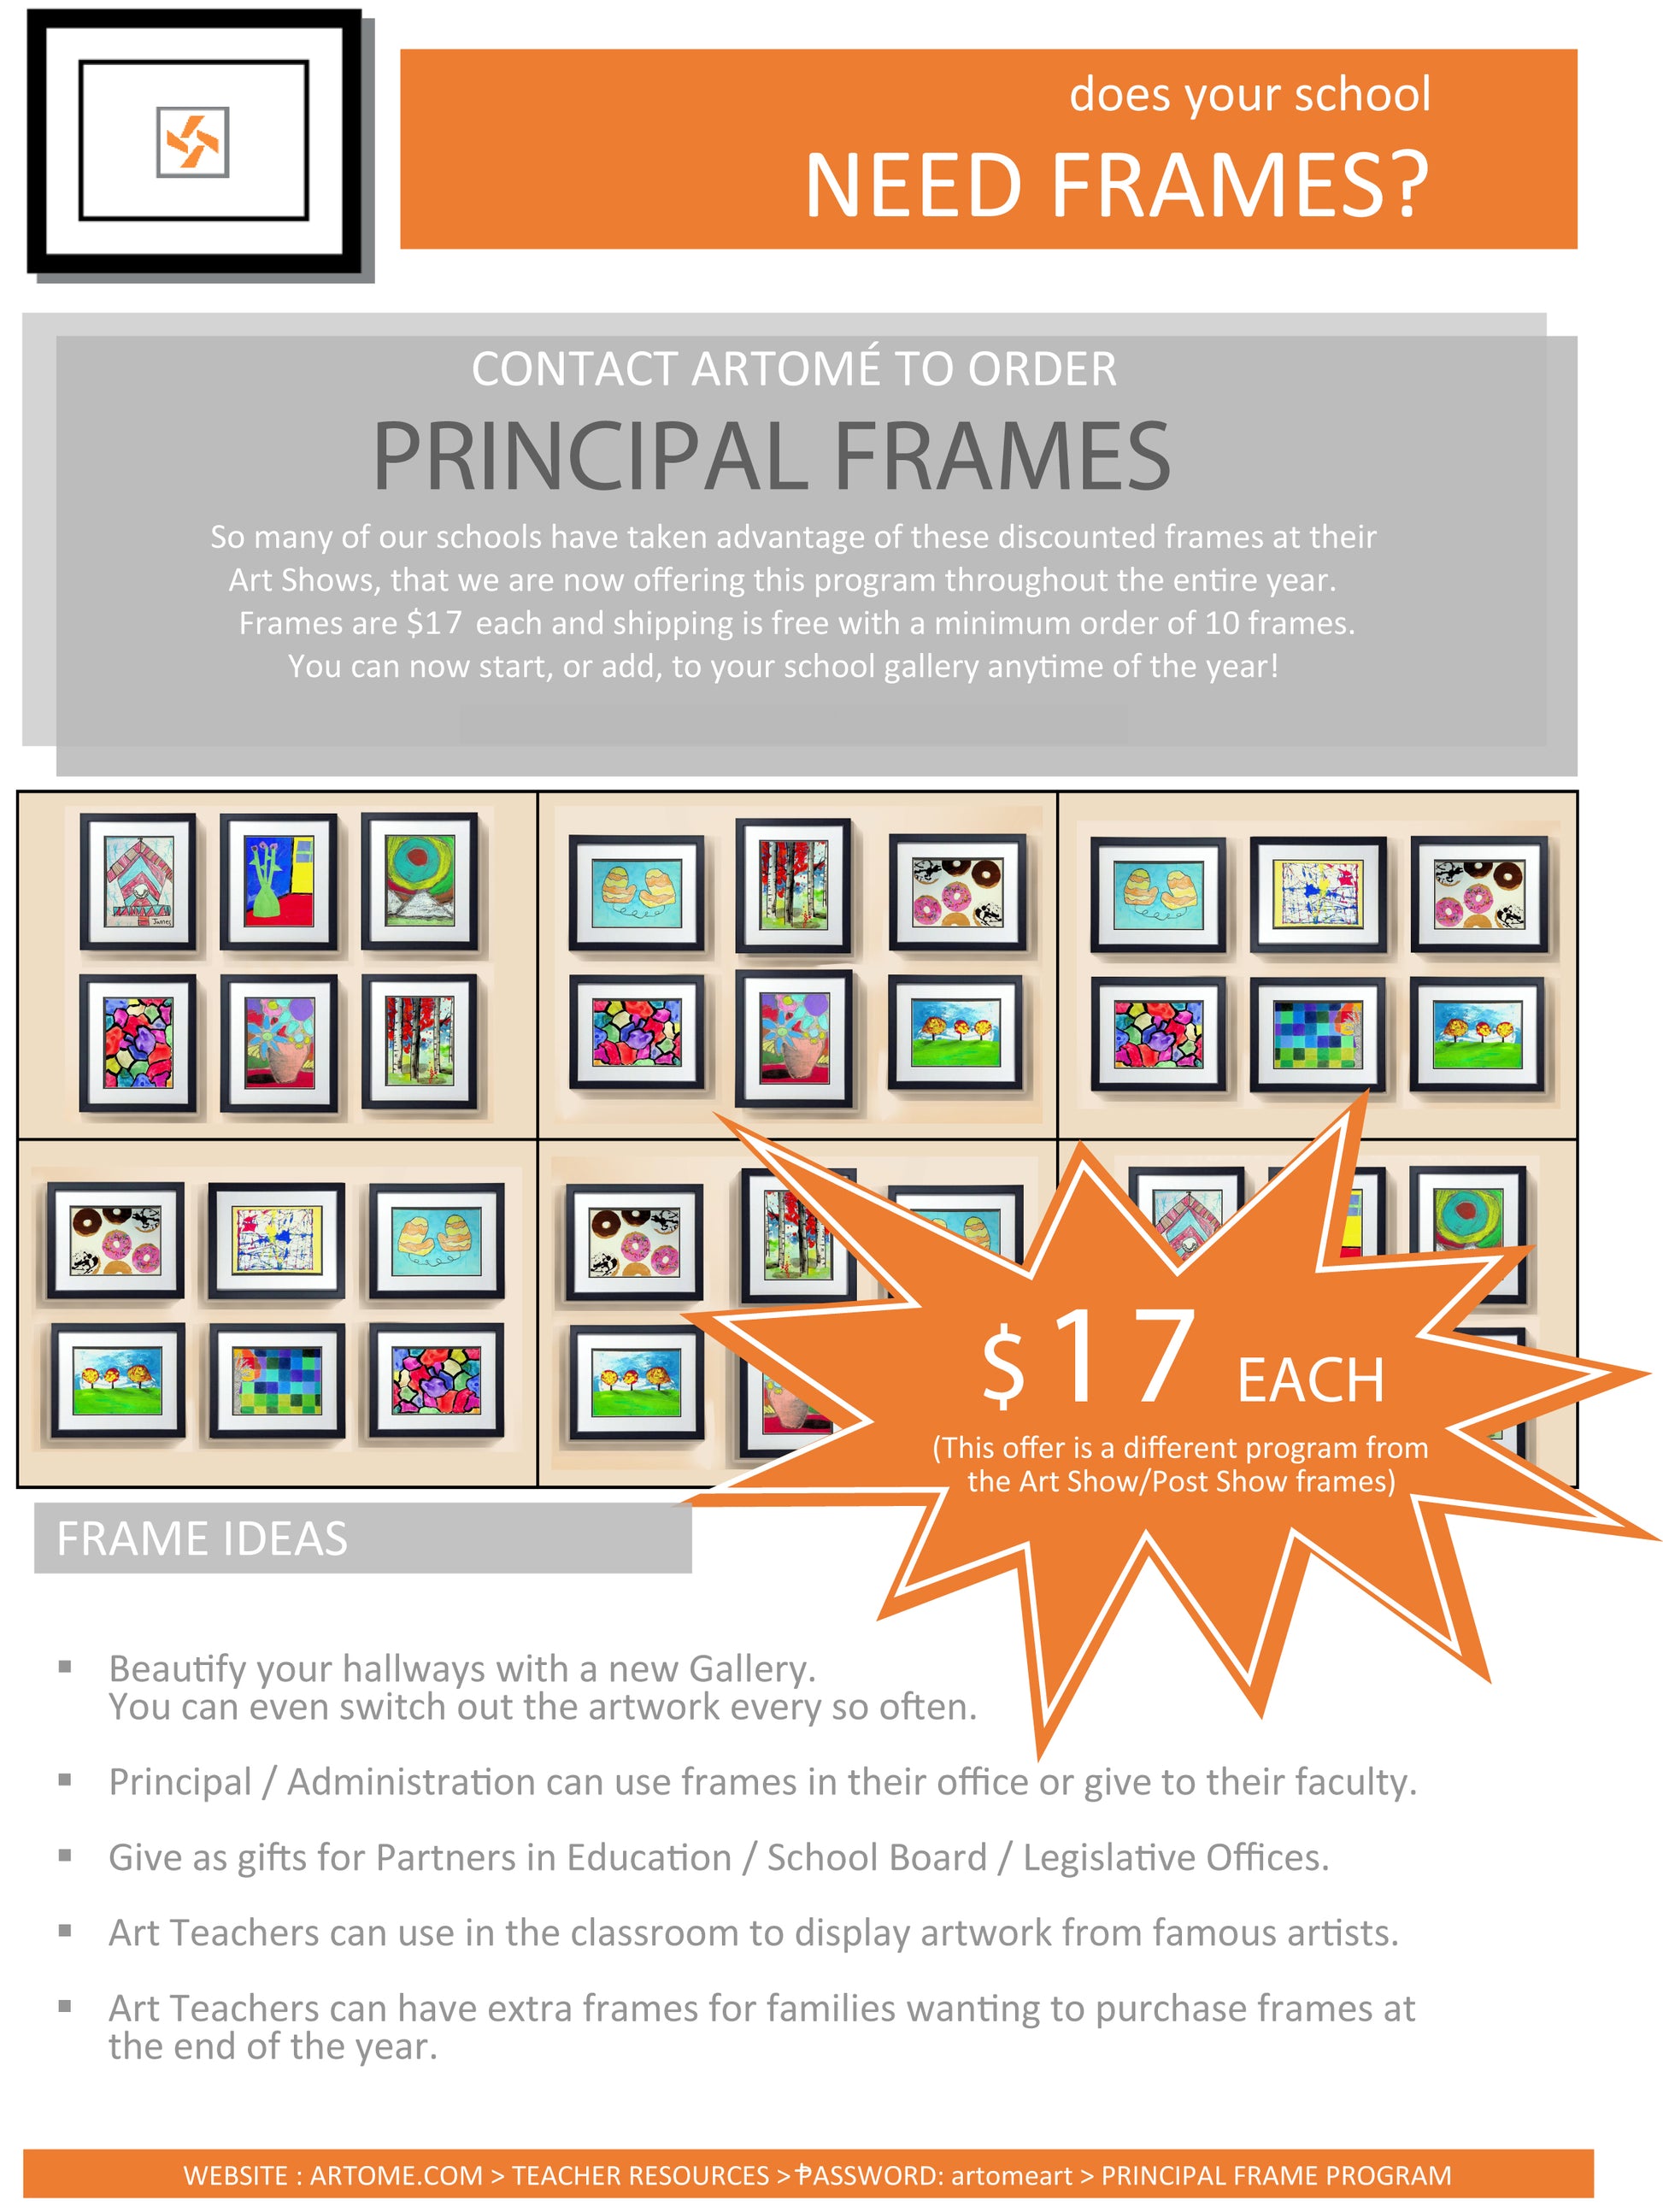 Framing Resources, Artist Resources